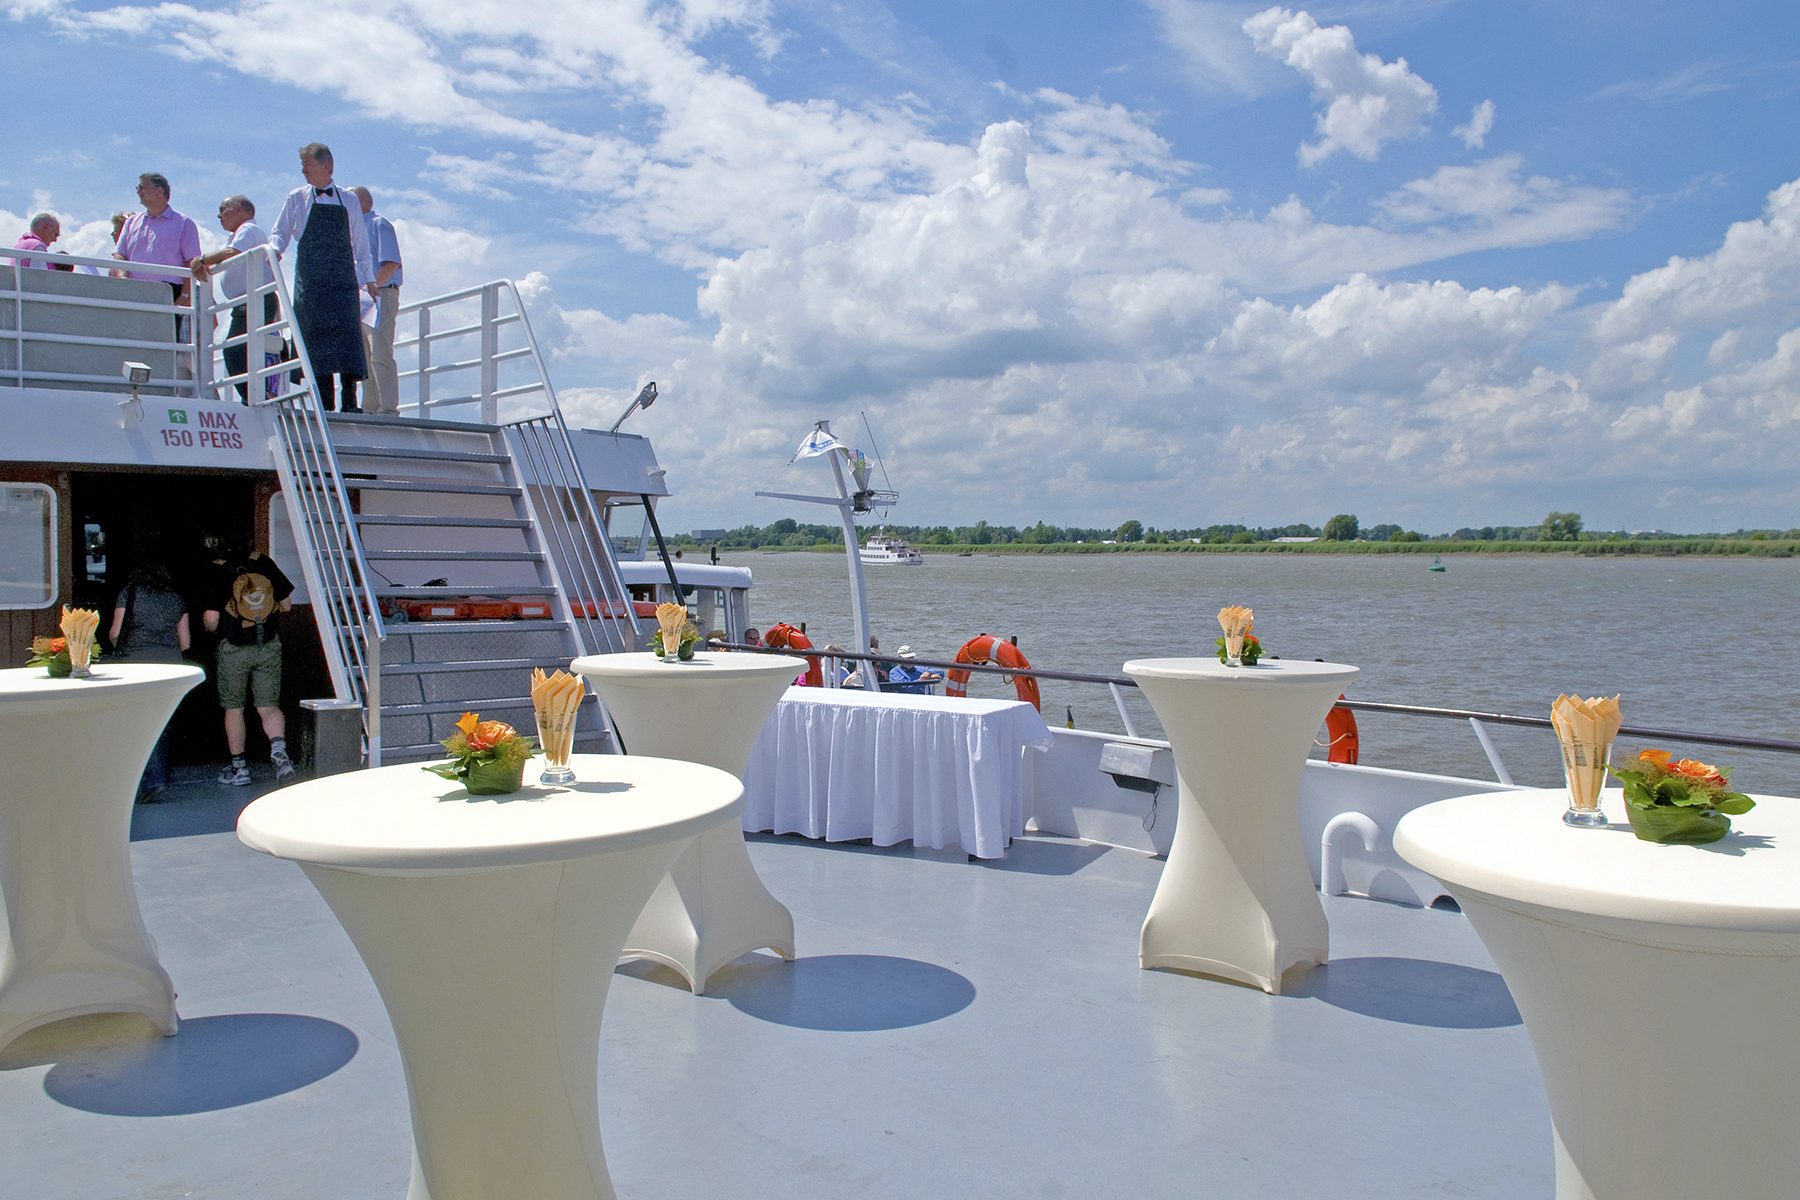 fotoreeks An example: a wedding party on board